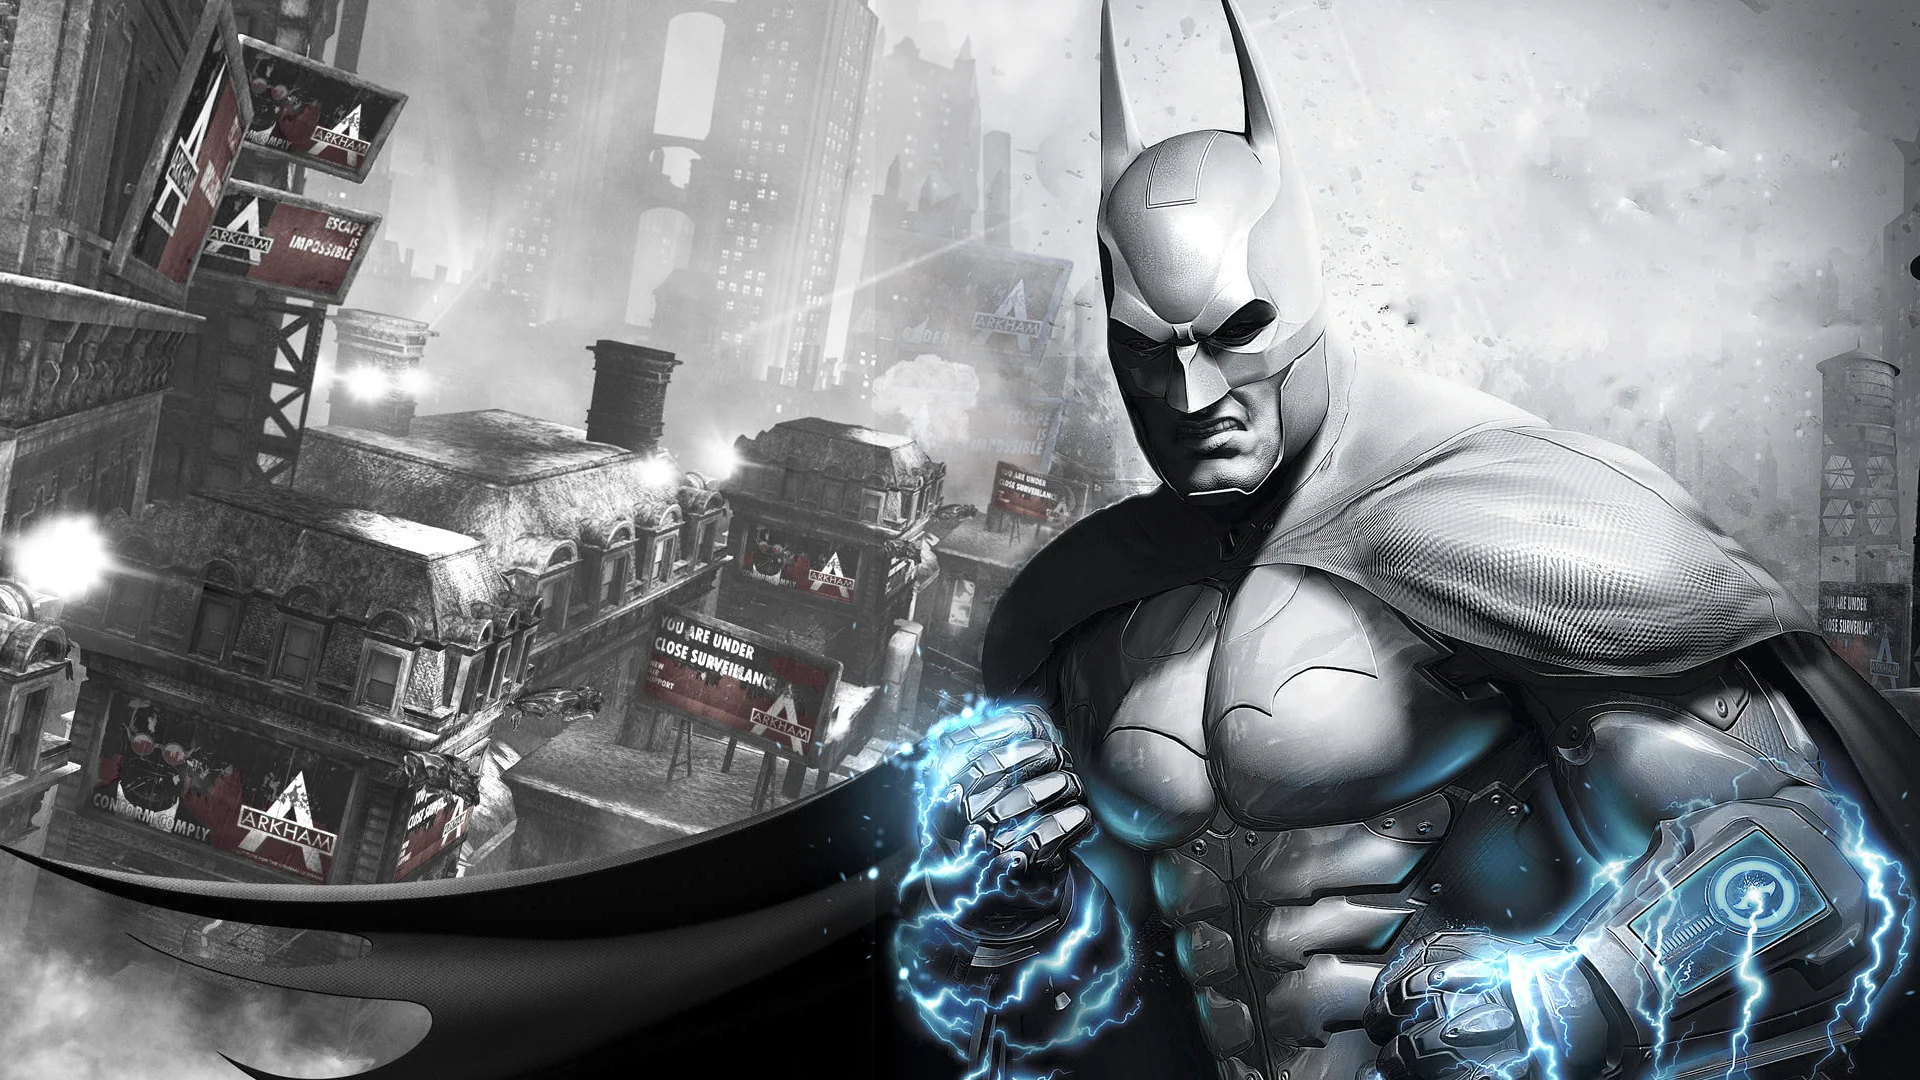 The famous gaming publication IGN has compiled the top 10 best superhero games based on DC comics